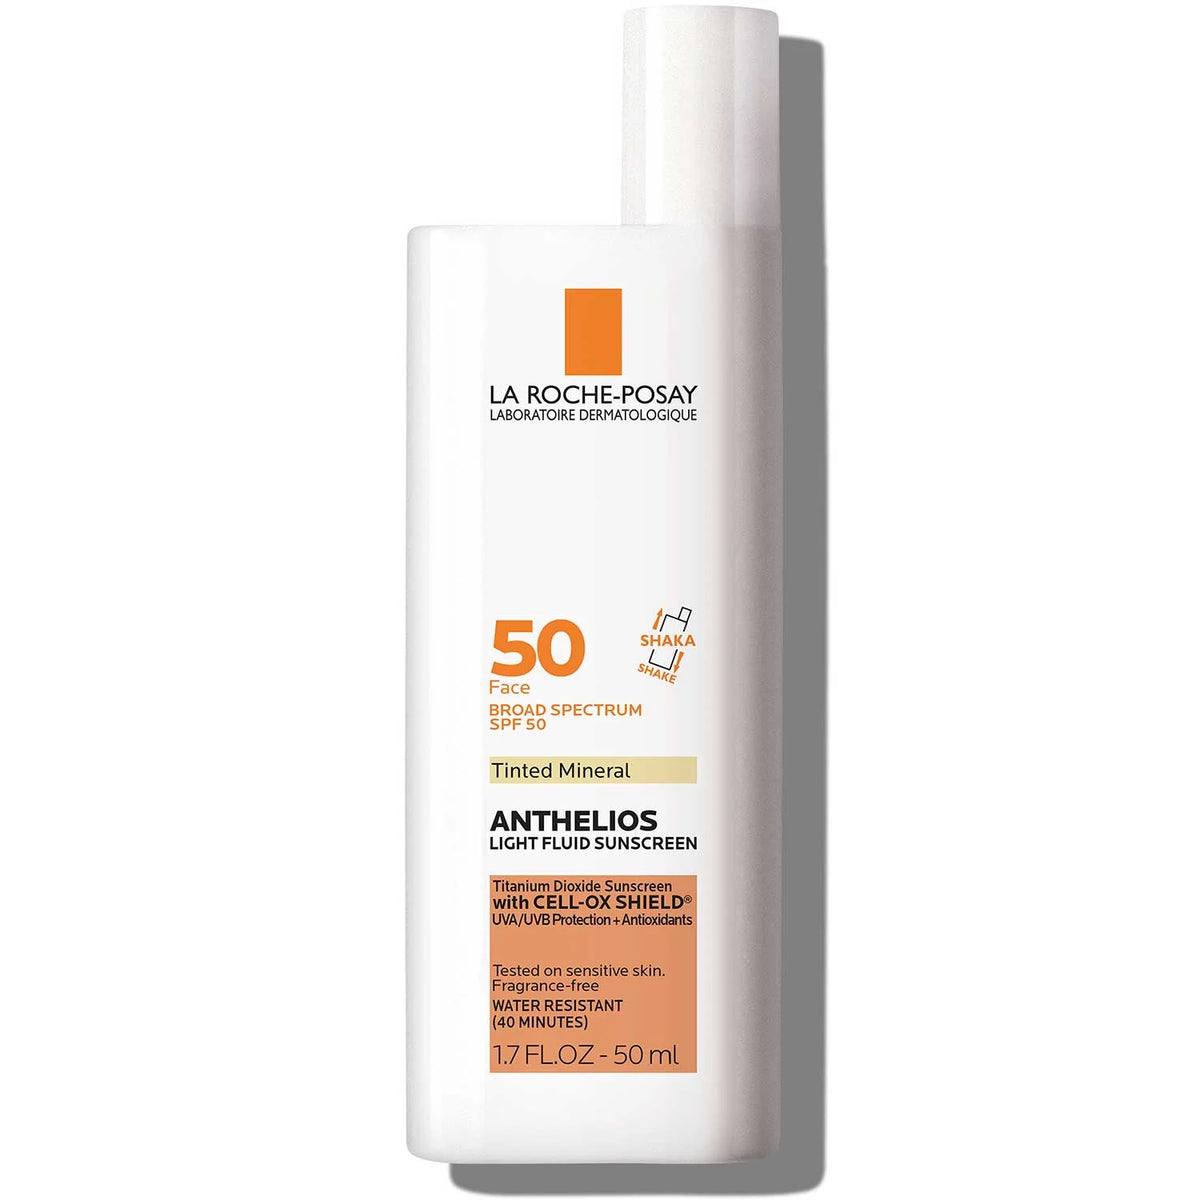 La Roche Posay Anthelios Tinted Mineral Face Sunscreen SPF 50 50Ml